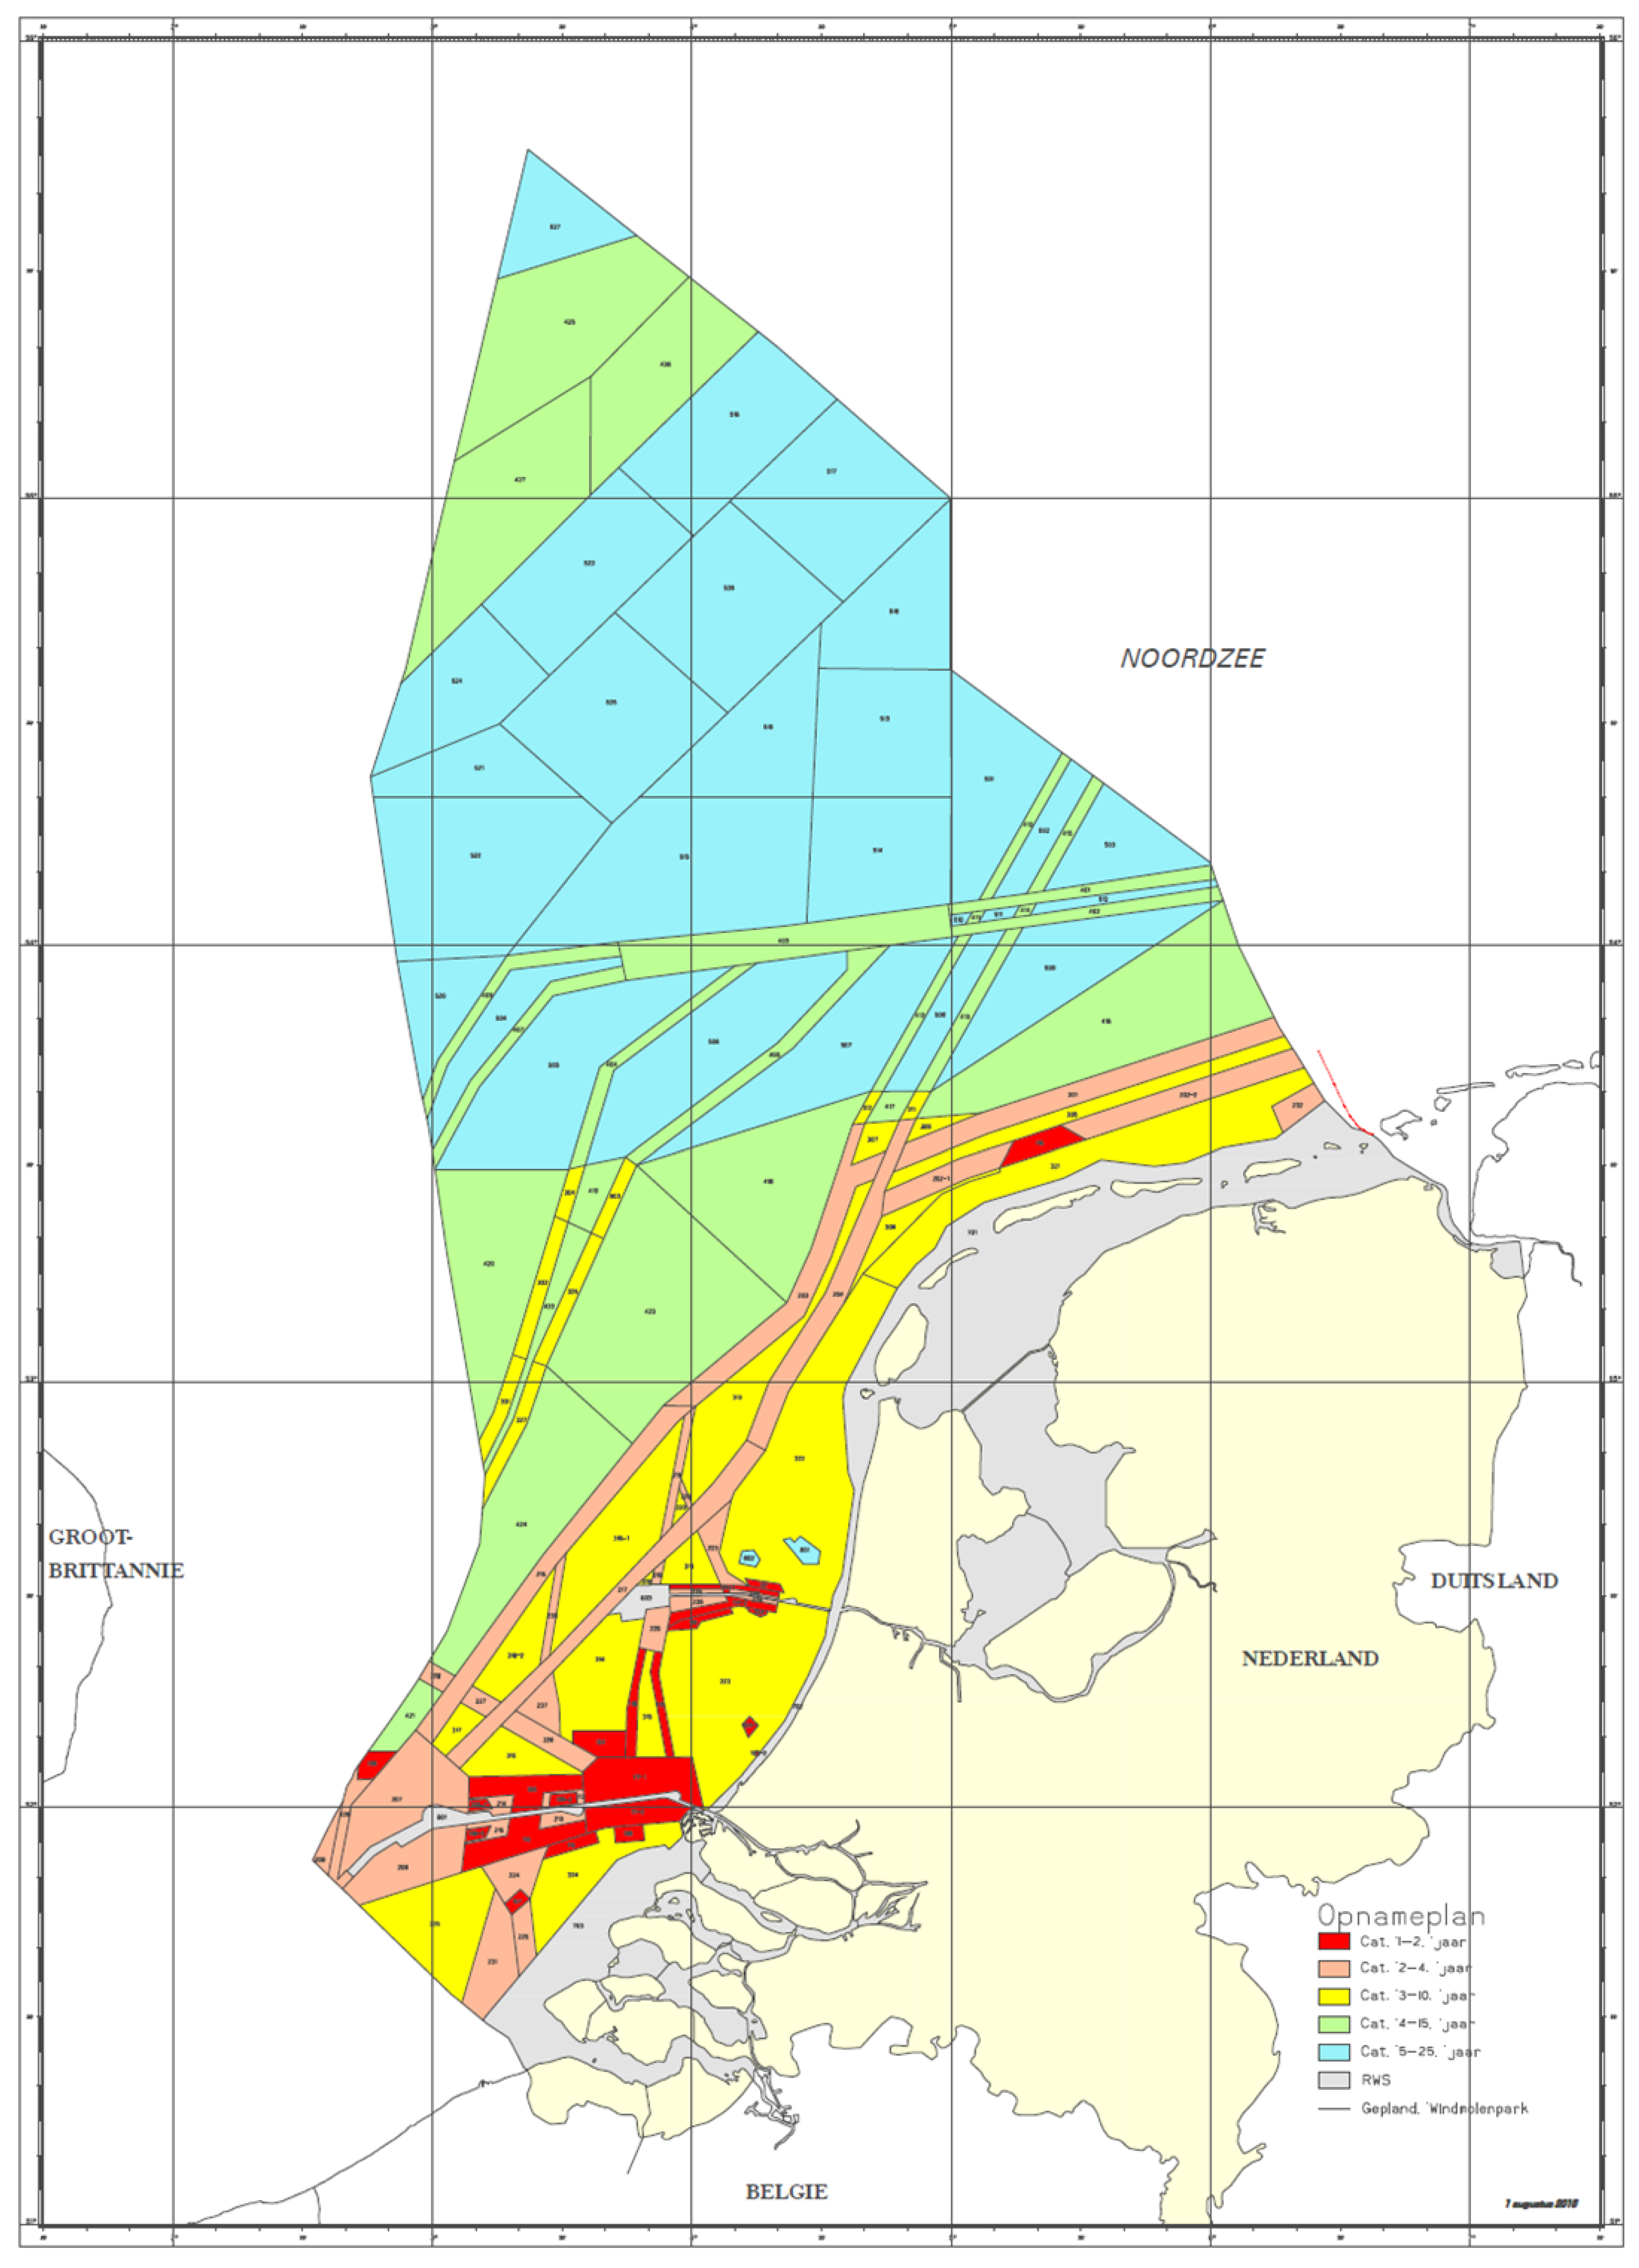 JMSE | Free Full-Text | Prediction of Changes in Seafloor Depths Based on  Time Series of Bathymetry Observations: Dutch North Sea Case